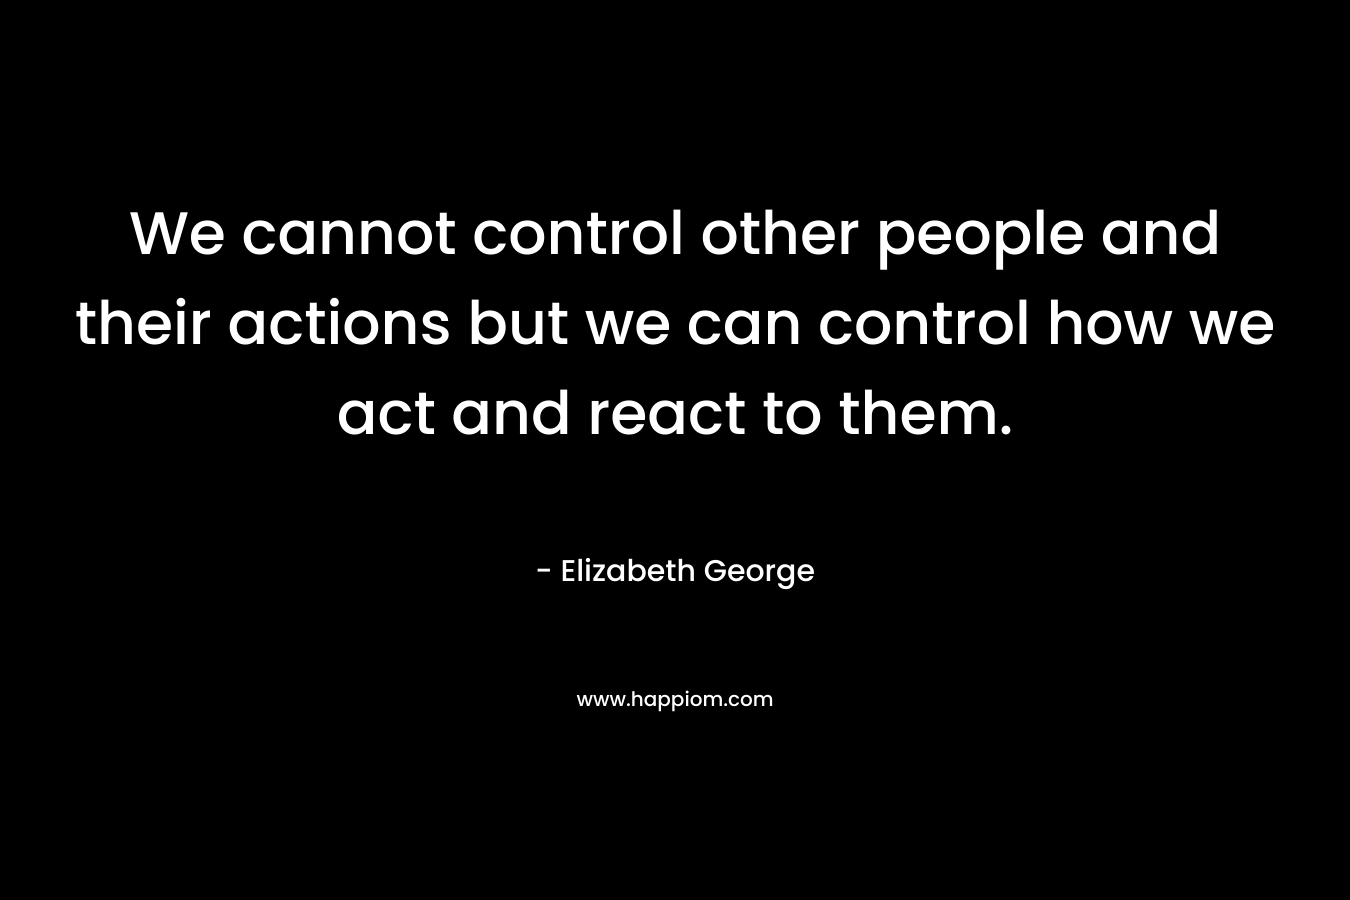 We cannot control other people and their actions but we can control how we act and react to them.